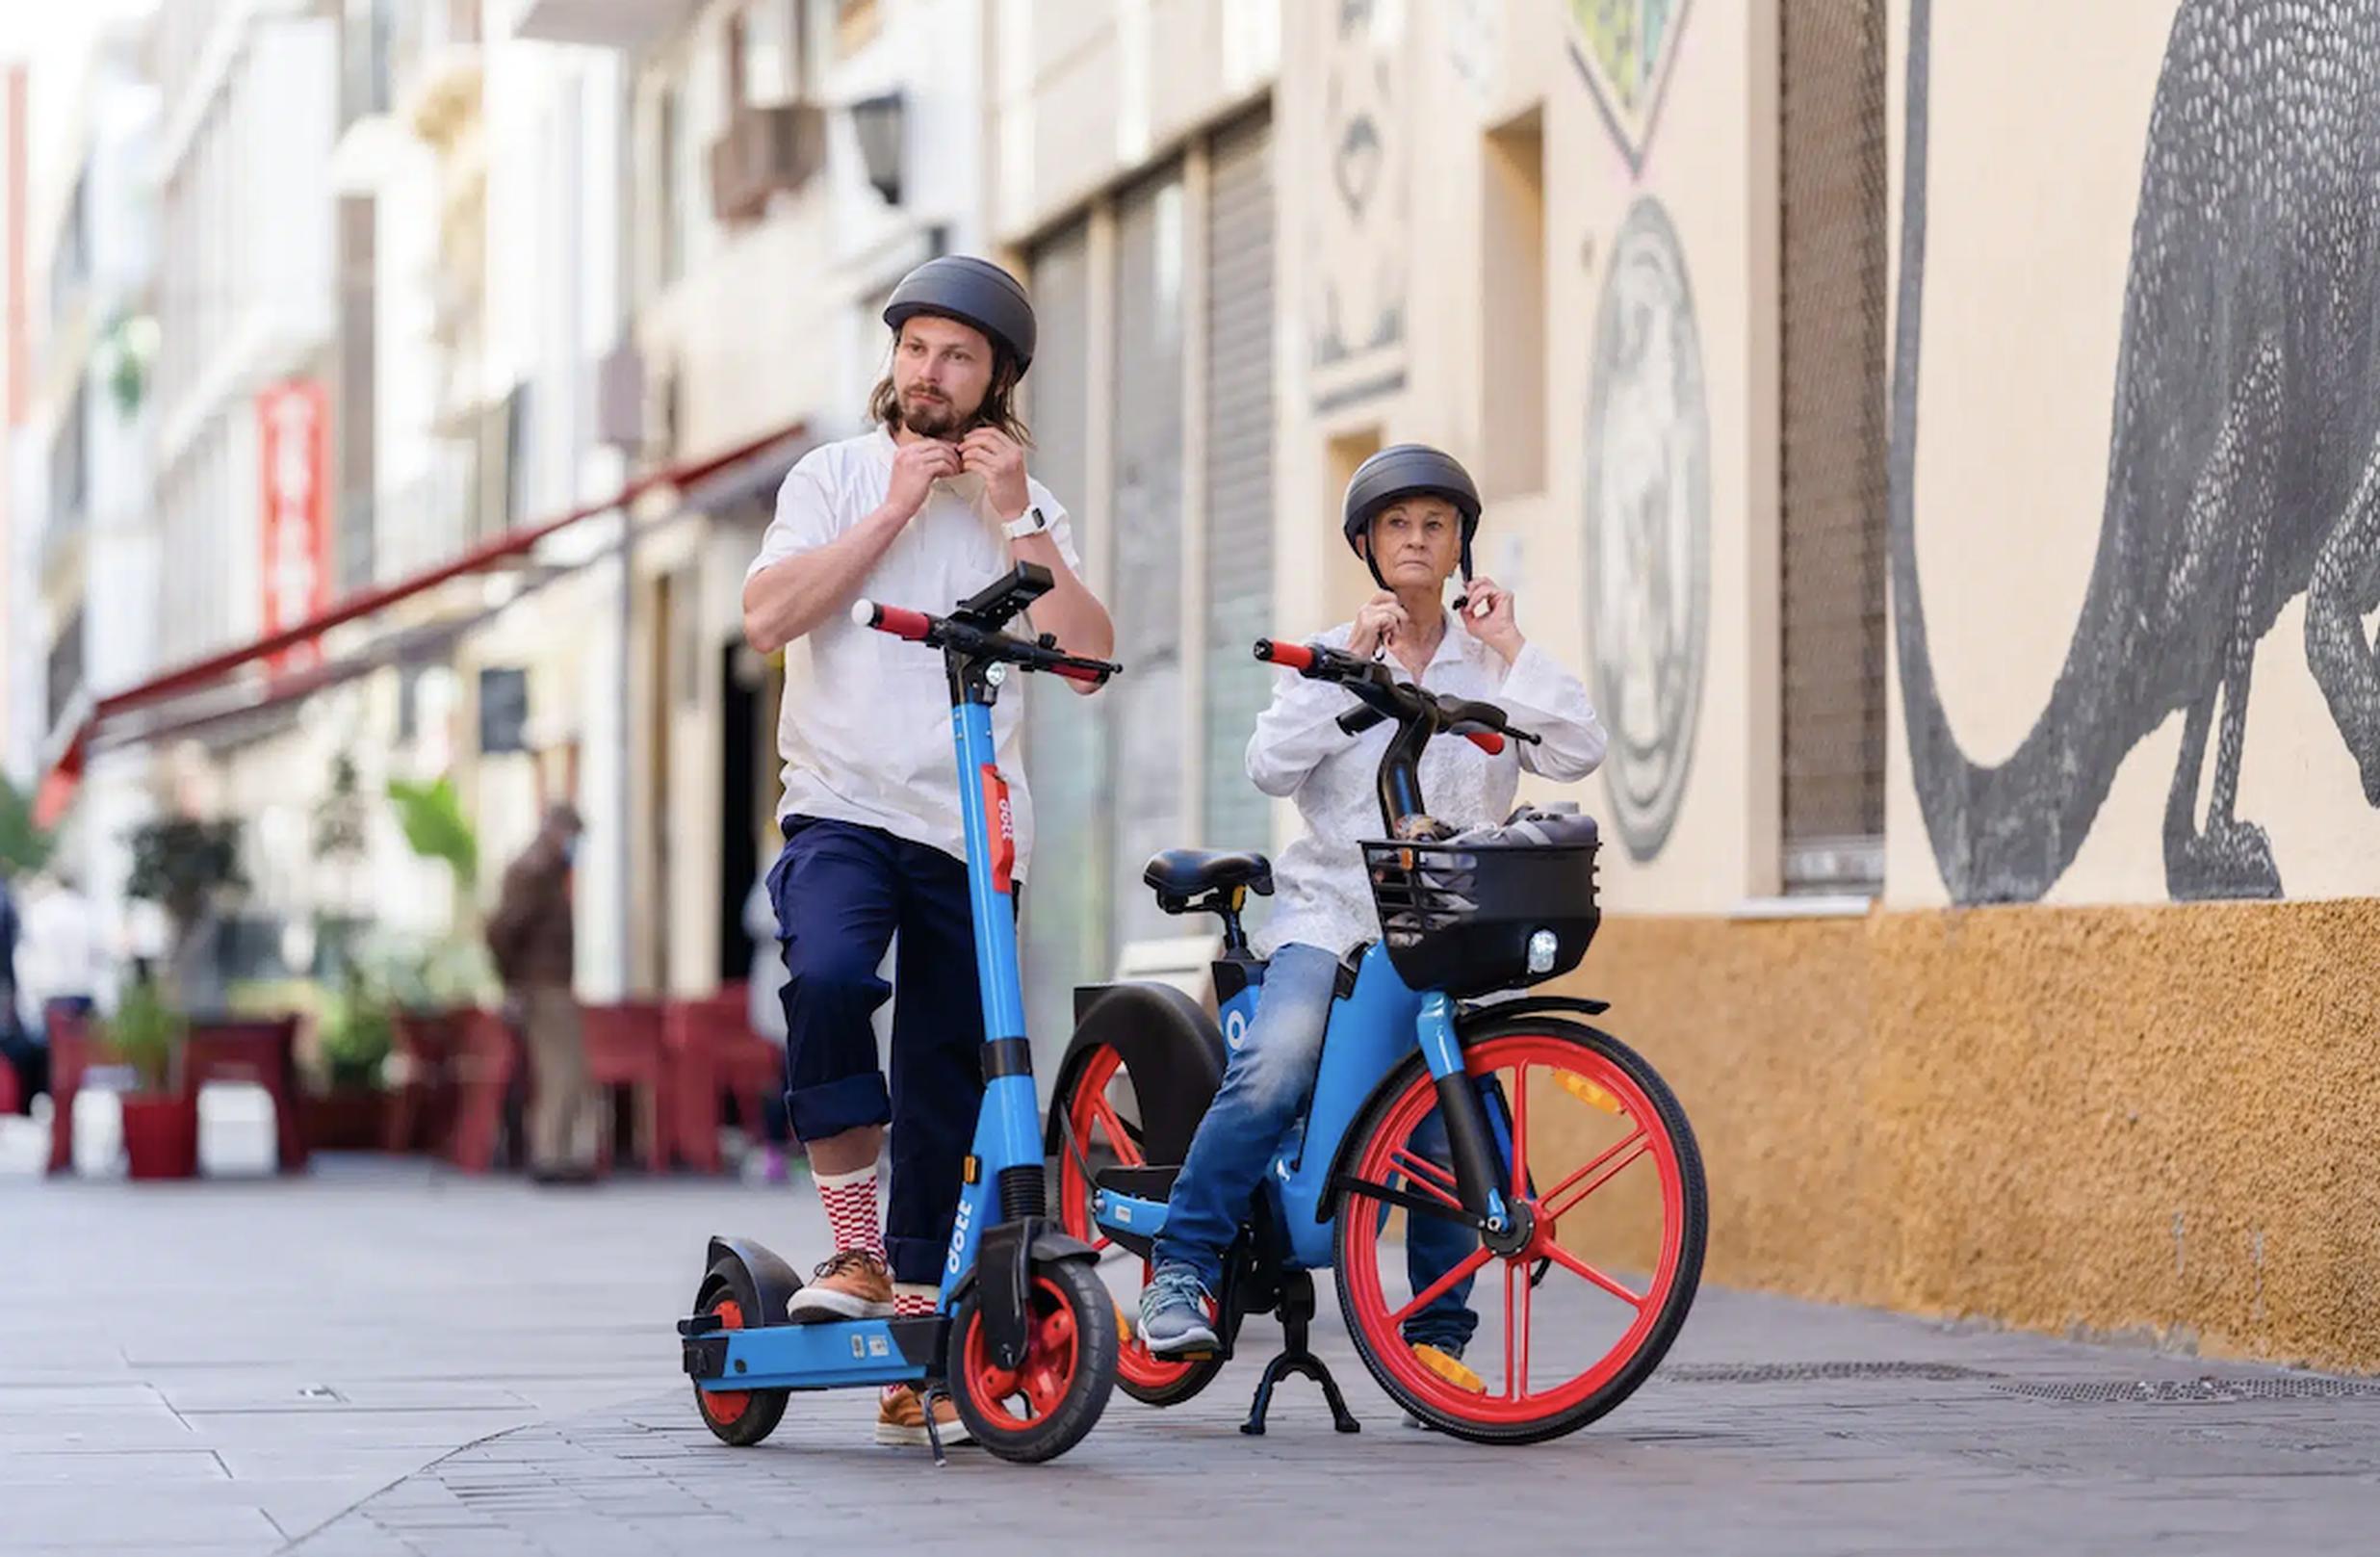 Energy crisis sparks rise in e-scooter and e-bike use, says Dott